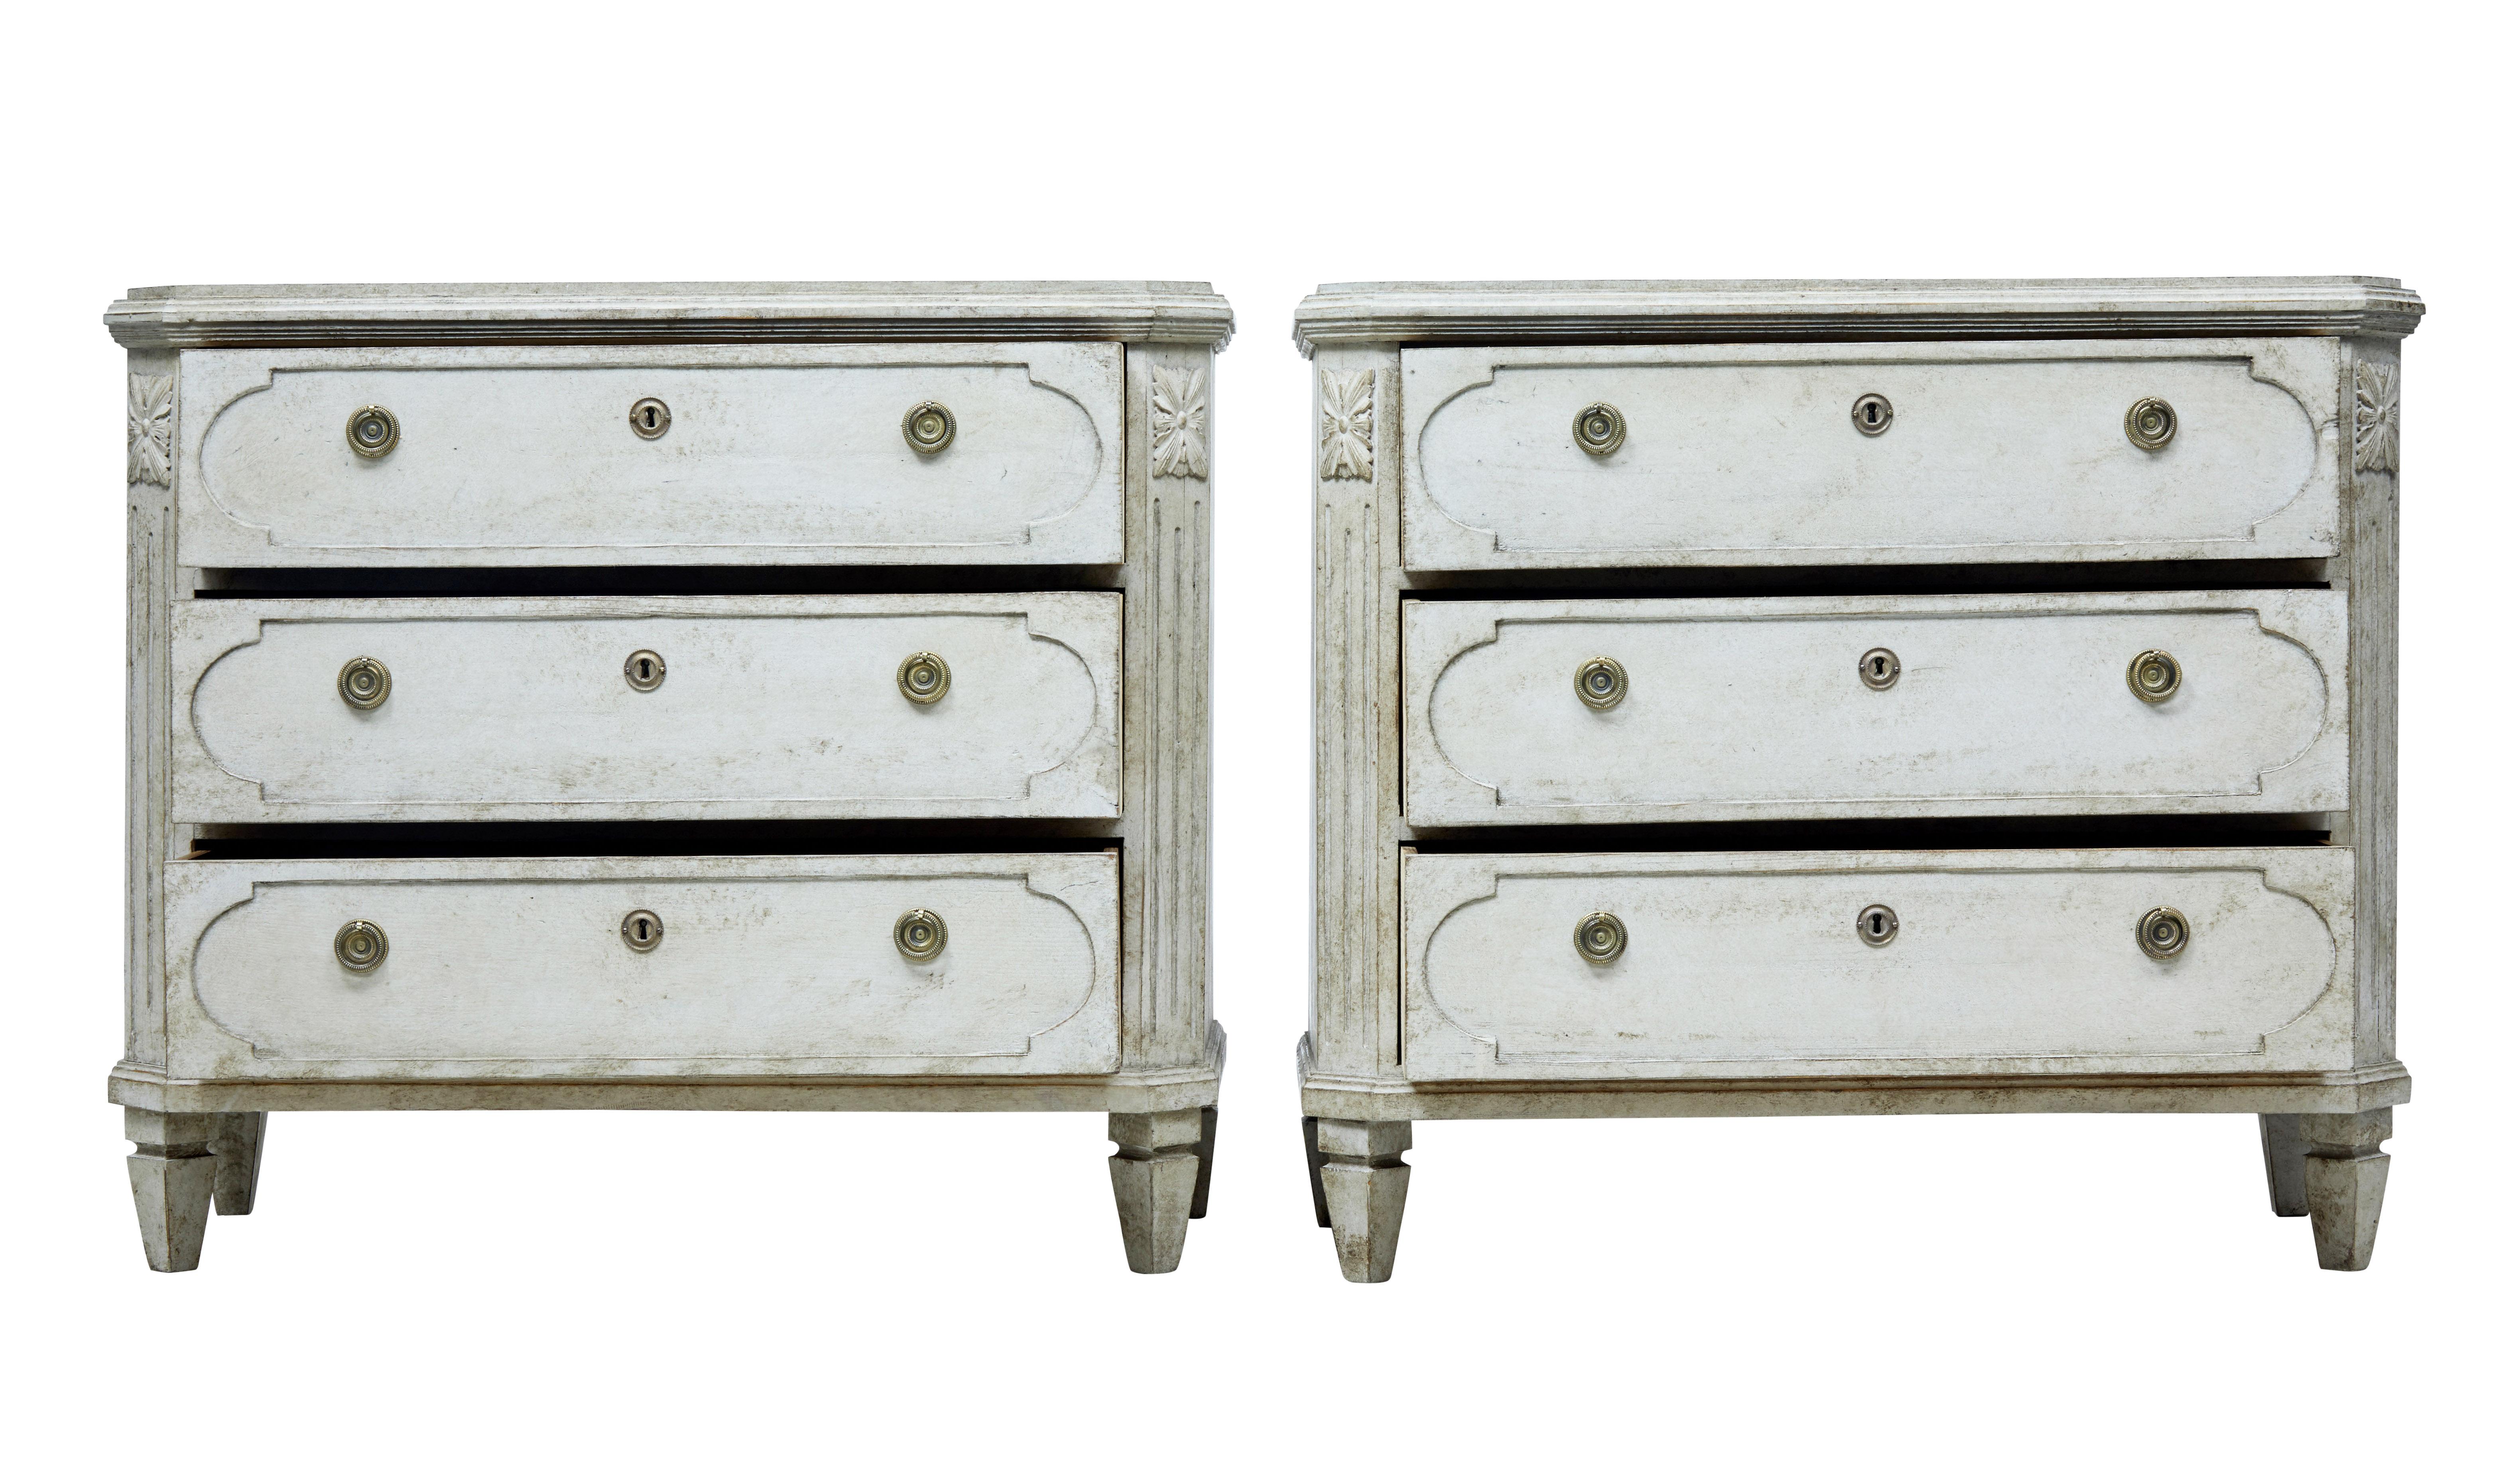 Pair of Gustavian inspired chest of drawers circa 1870.

3 drawer chests with shaped fronts, later ring handles and escutcheons. Canted corners with applied acanthus detailing.

Working locks and key. Standing on short tapered feet.

Later